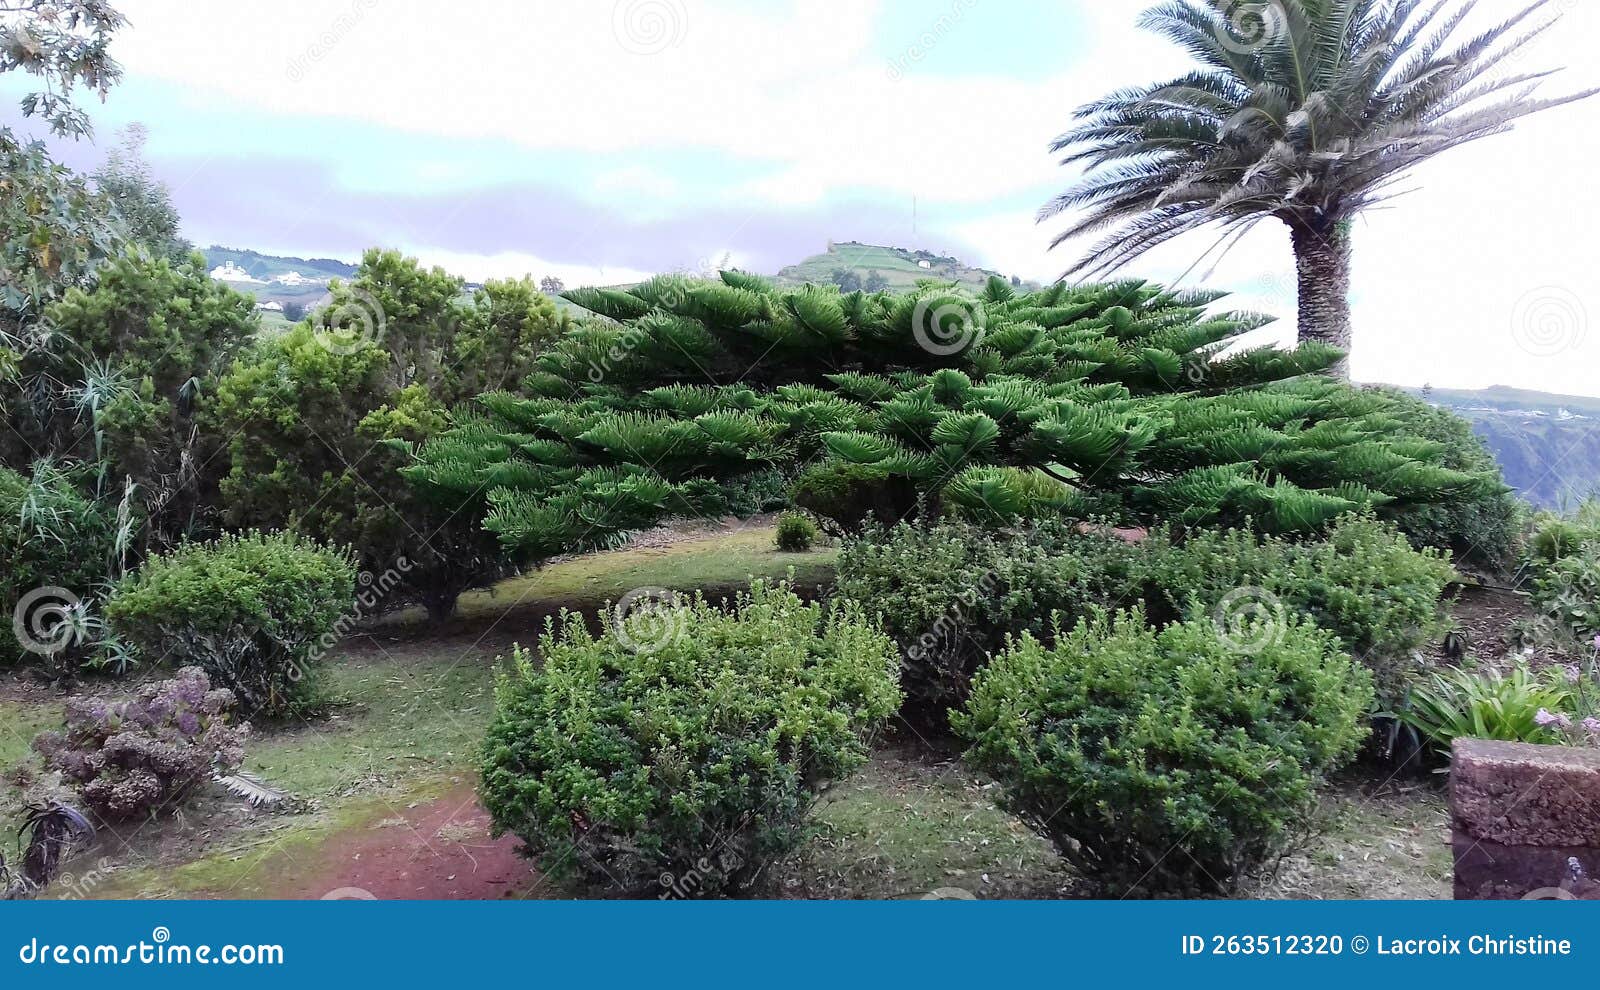 araucaria in parasol and canarian palm at the miradouro despe-te-que-suas on the island of sao miguel